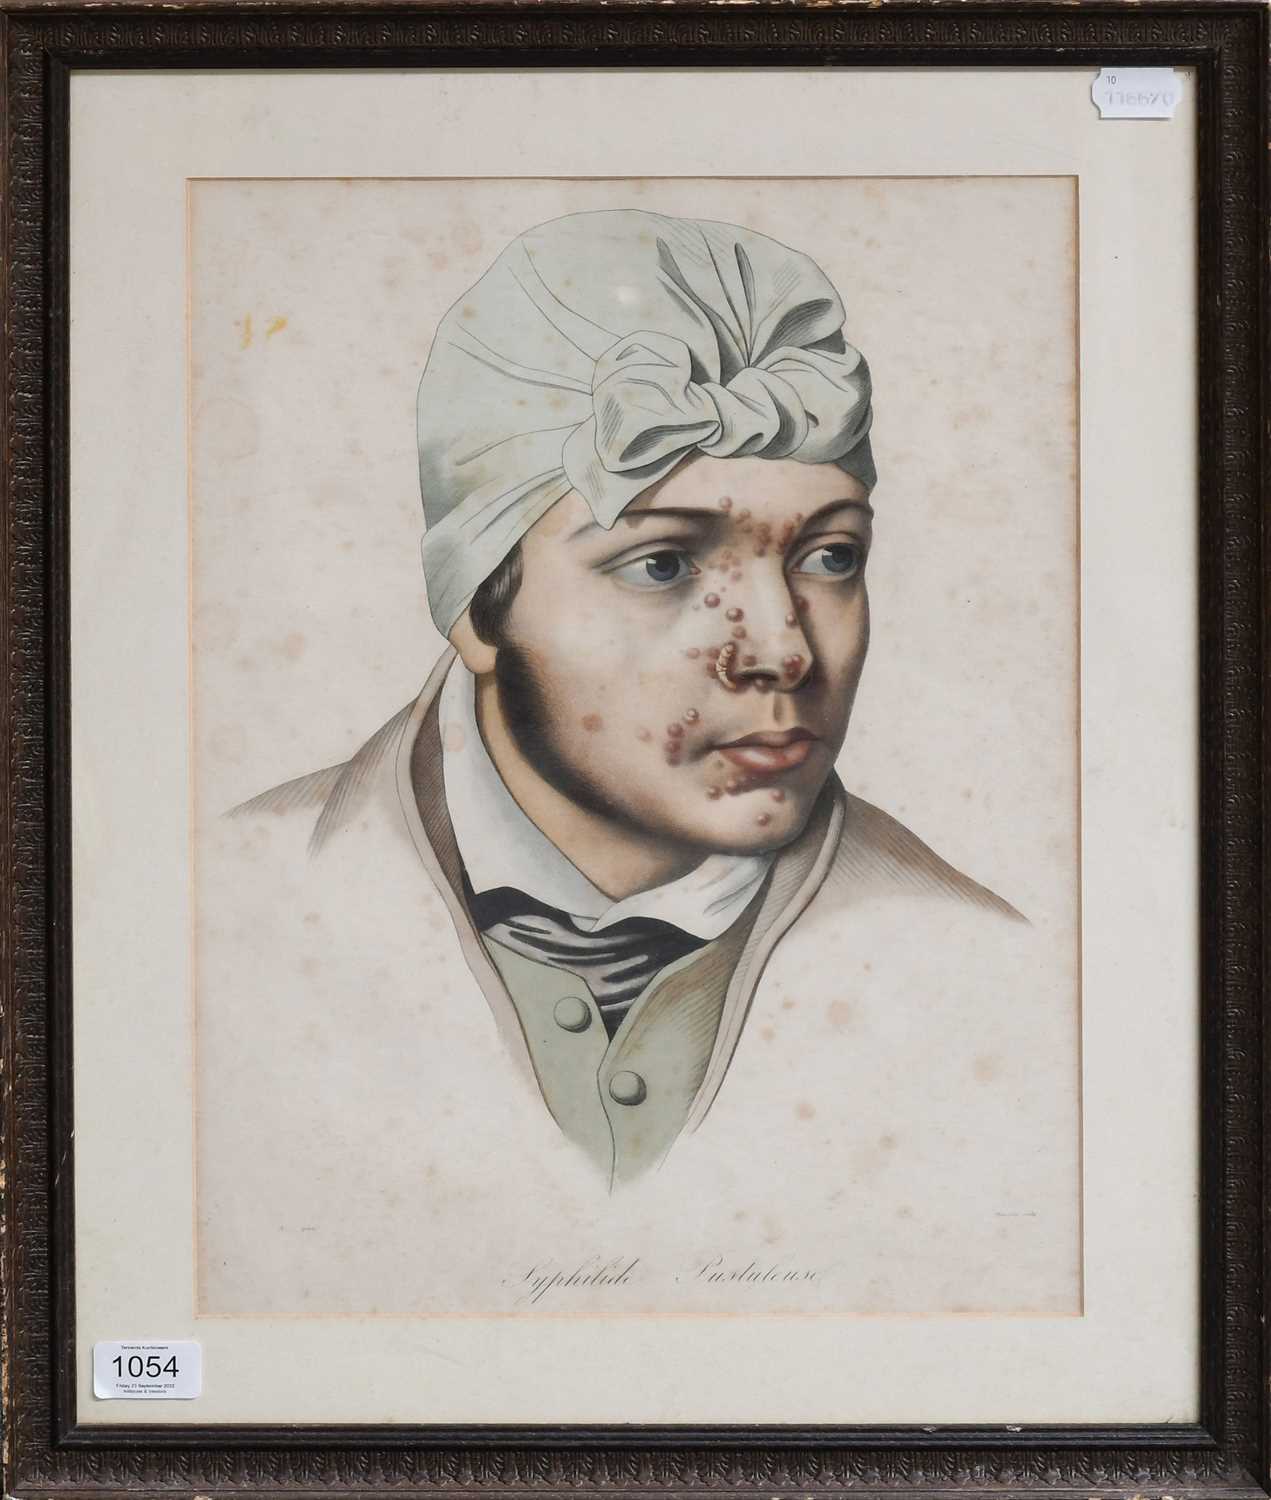 Syphilide PustuleusePortrait of a man with pustular syphilis, coloured print, engraved by Manceau, - Image 2 of 2